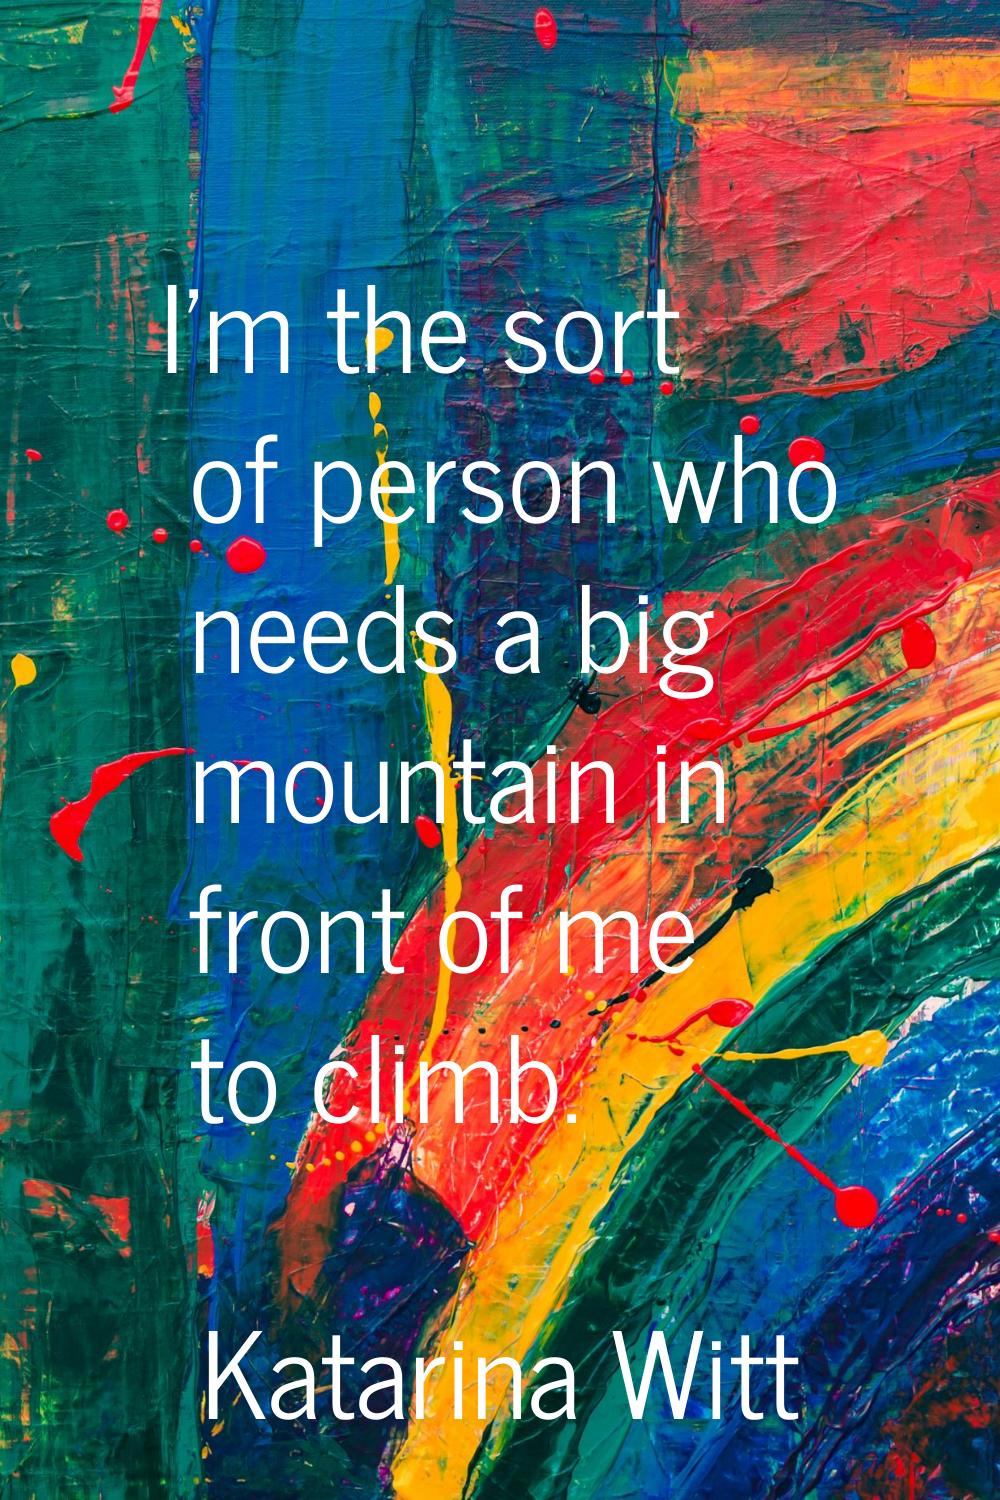 I'm the sort of person who needs a big mountain in front of me to climb.